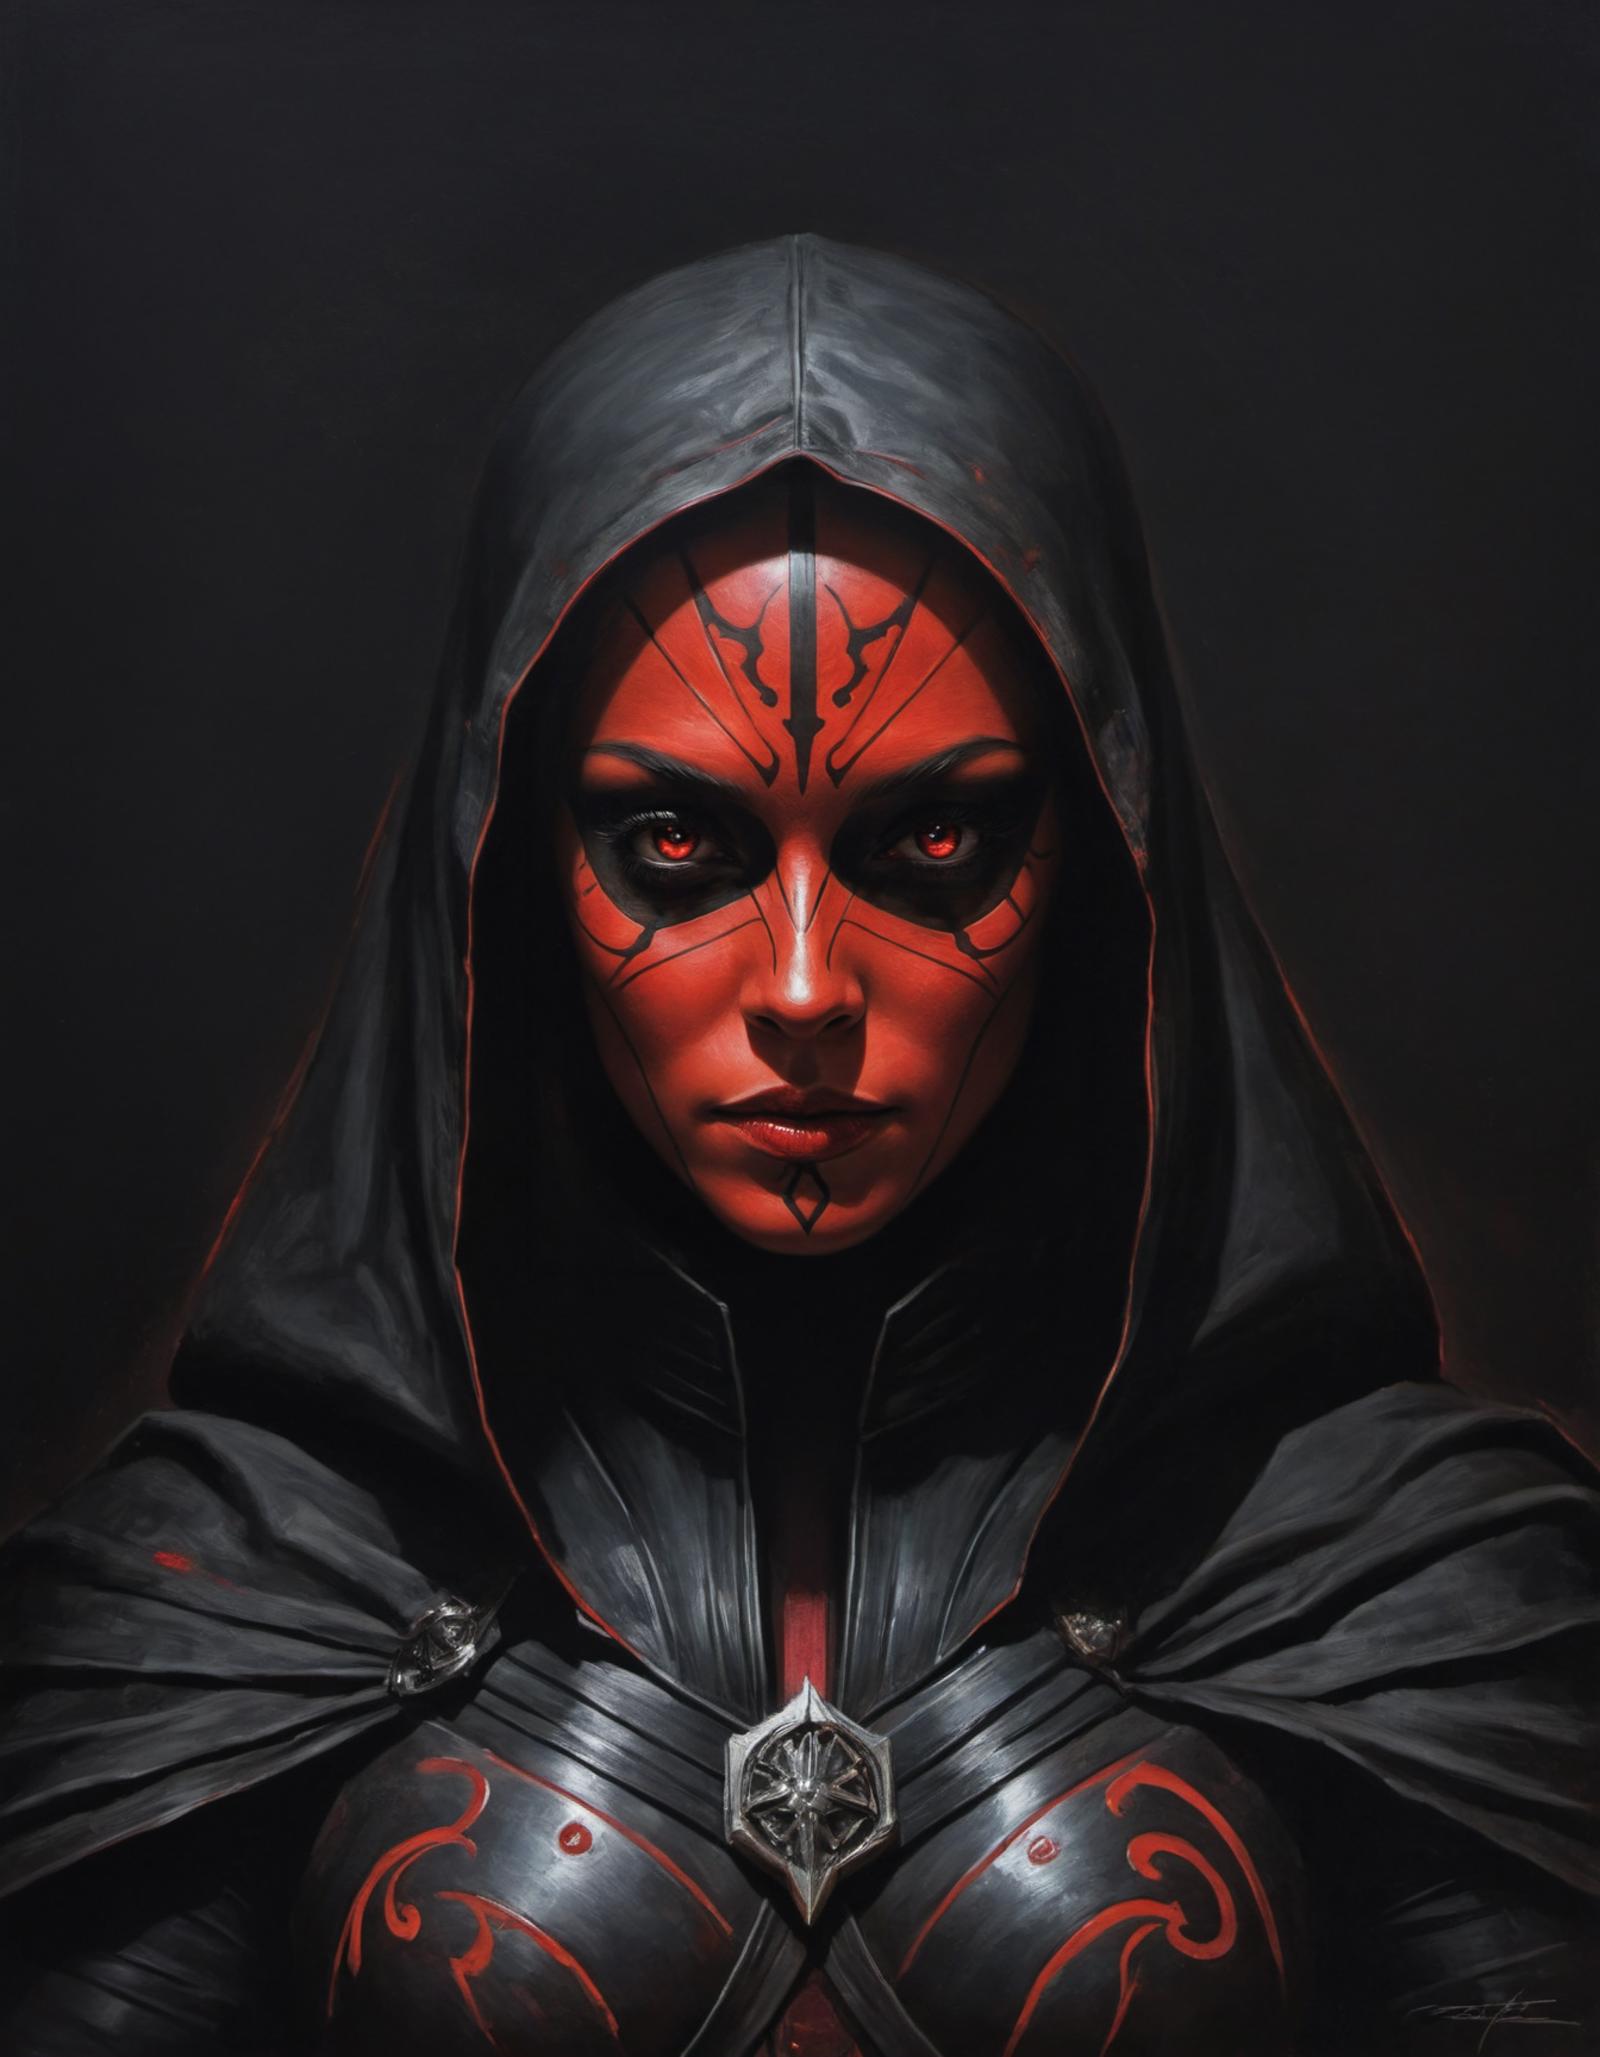 A portrait of a woman with red eyes and a black hooded costume.